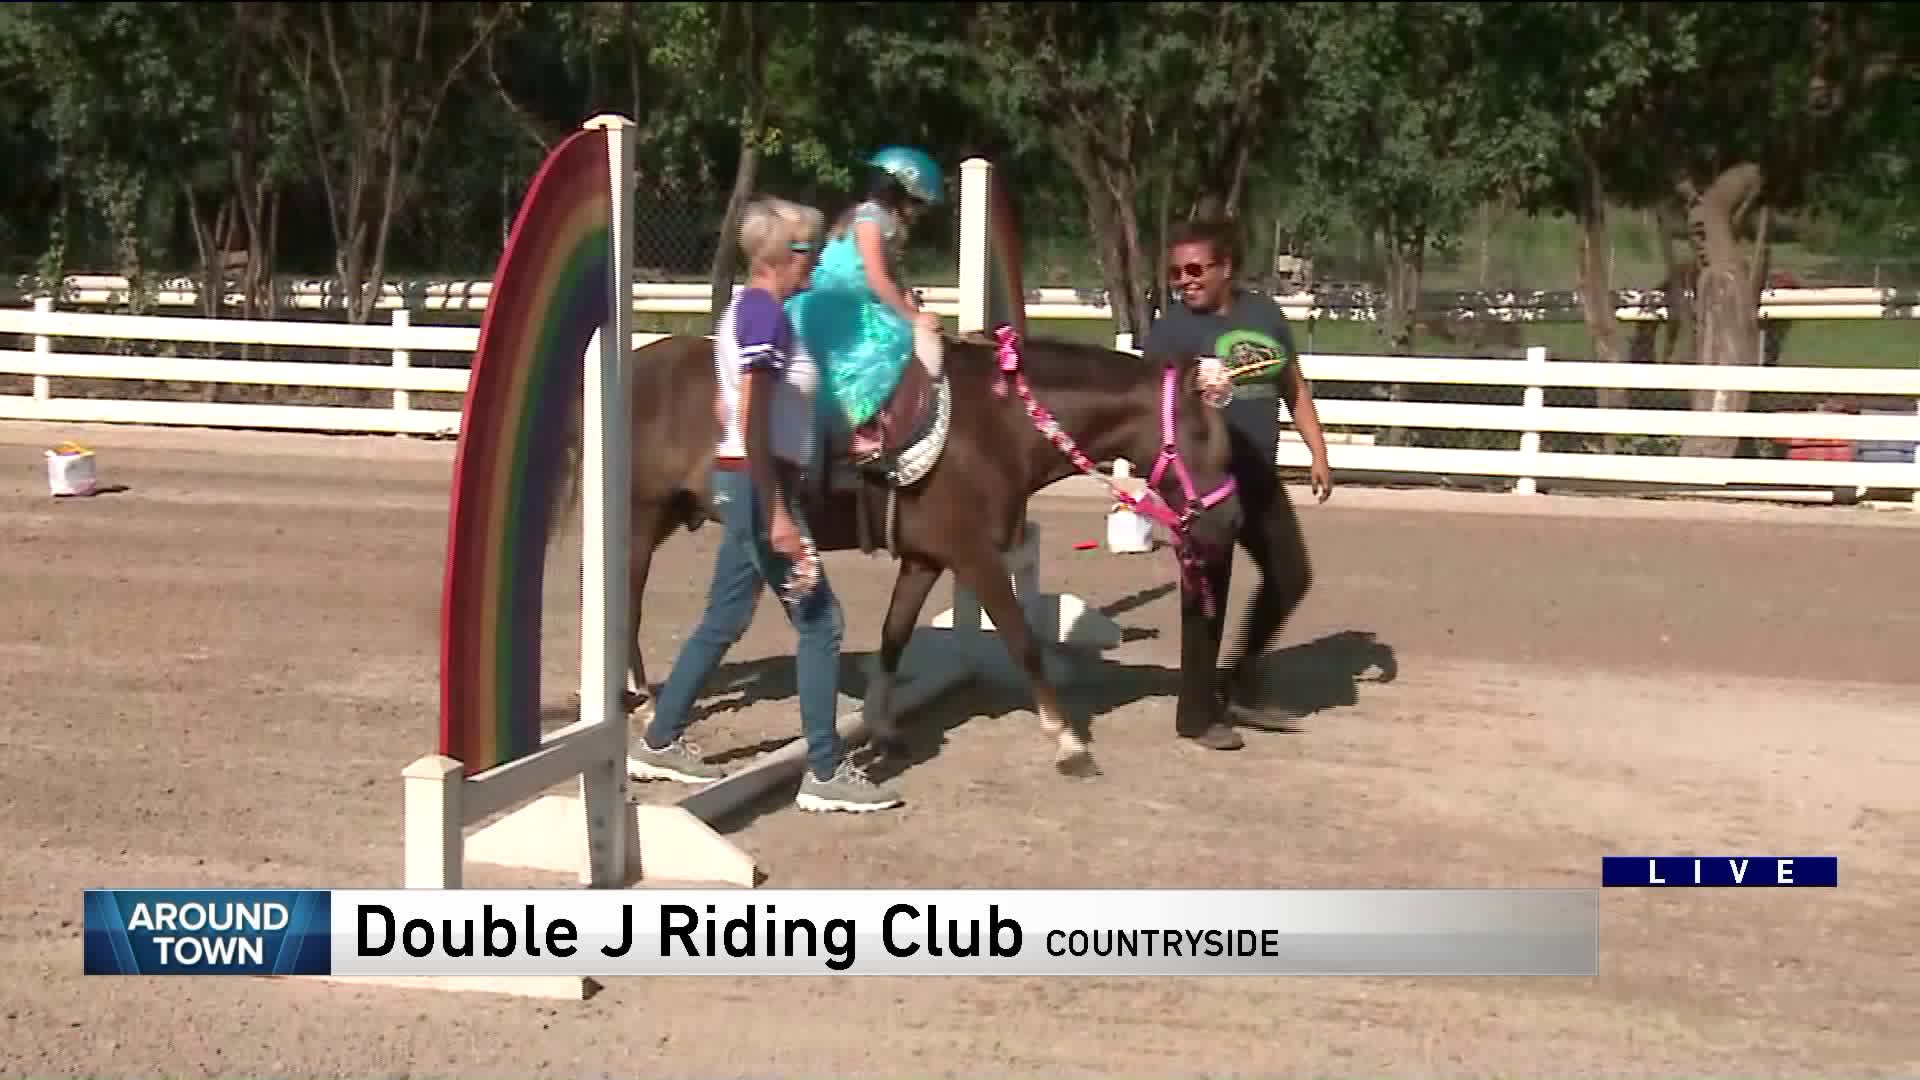 Around Town visits Double J Riding Club